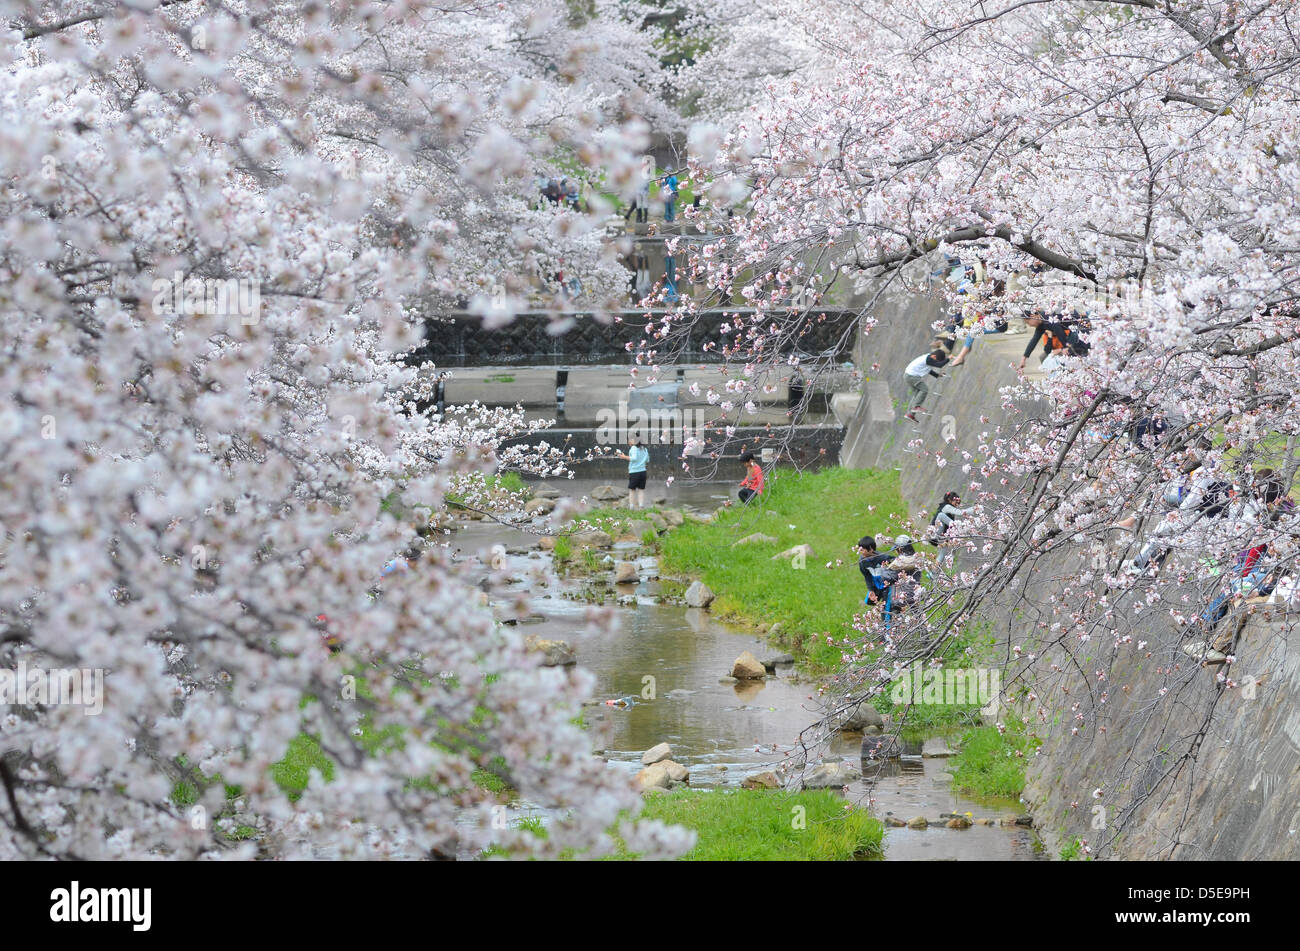 Kobe, Japan. 30th March, 2013 – Families and friends gather along a river in Shukugawa near Kobe on Saturday to celebrate the coming of spring. Credit image: Trevor Mogg / Alamy Live News Stock Photo